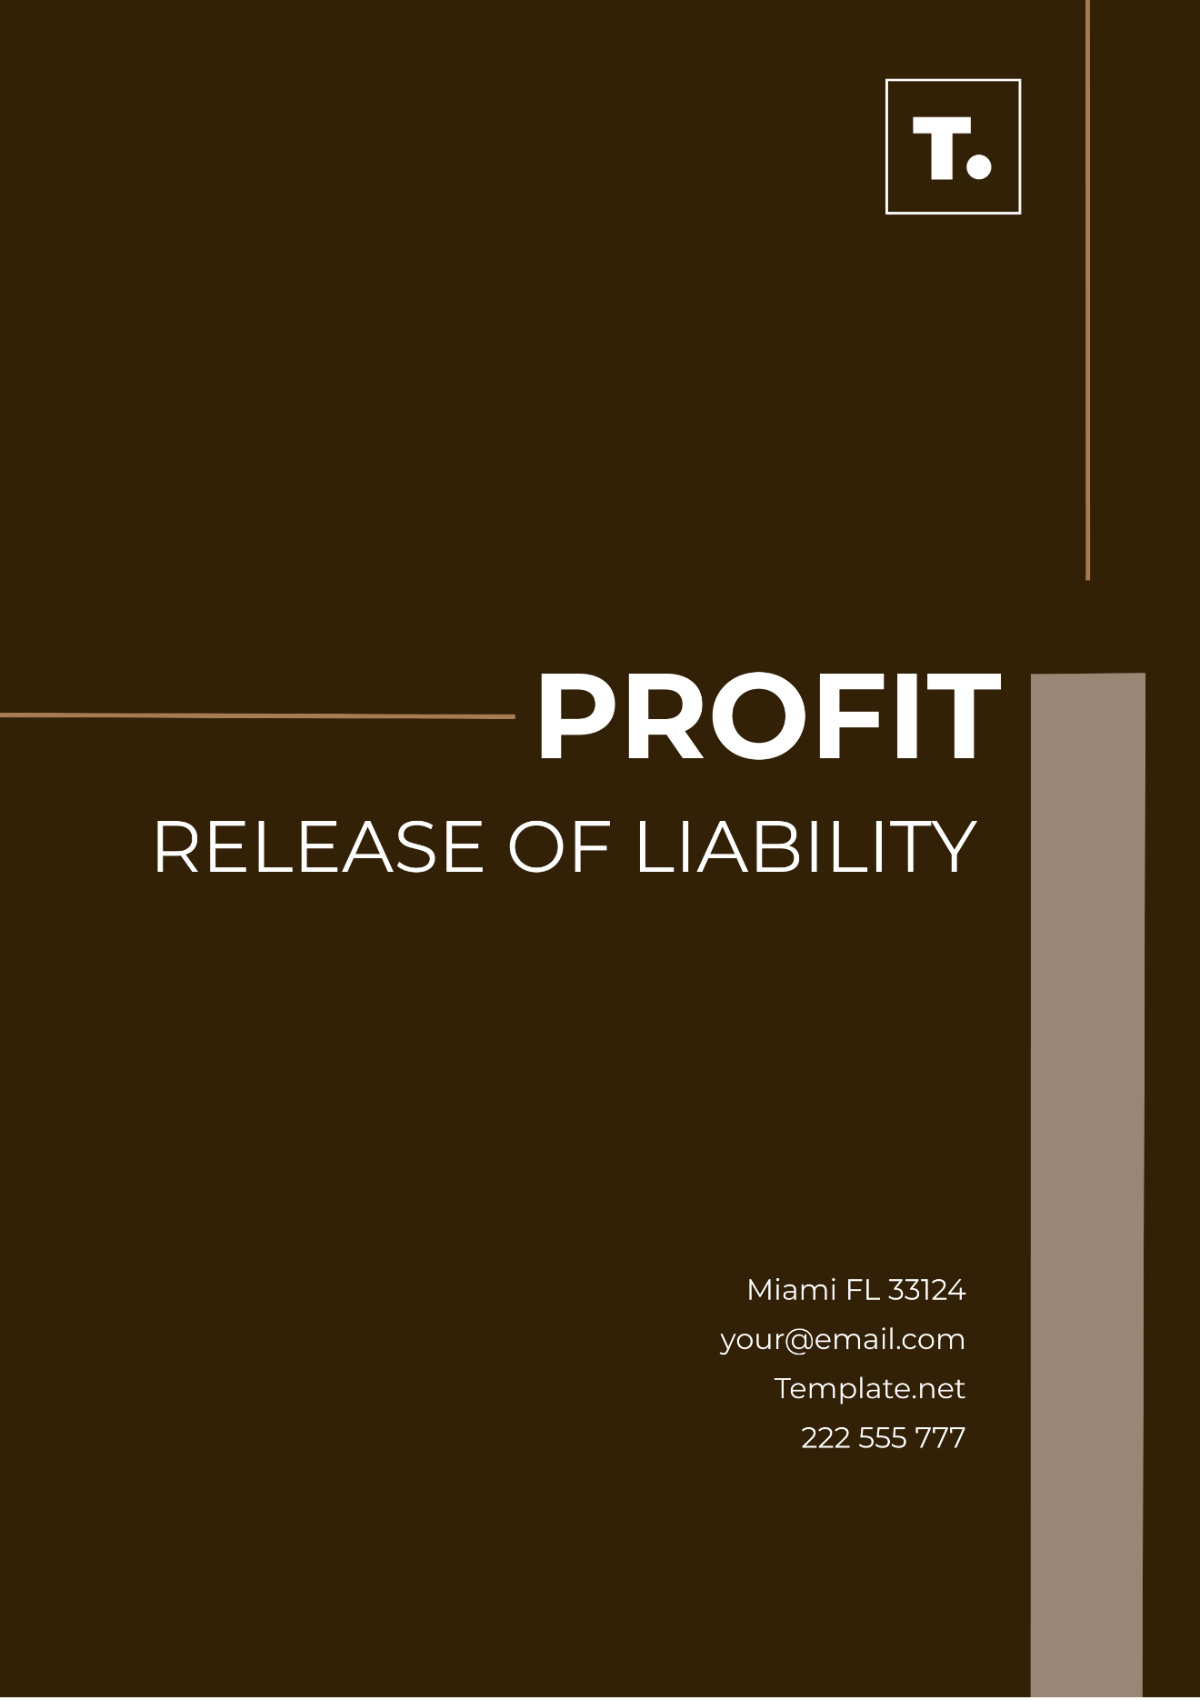 Free Profit Release Of Liability Template